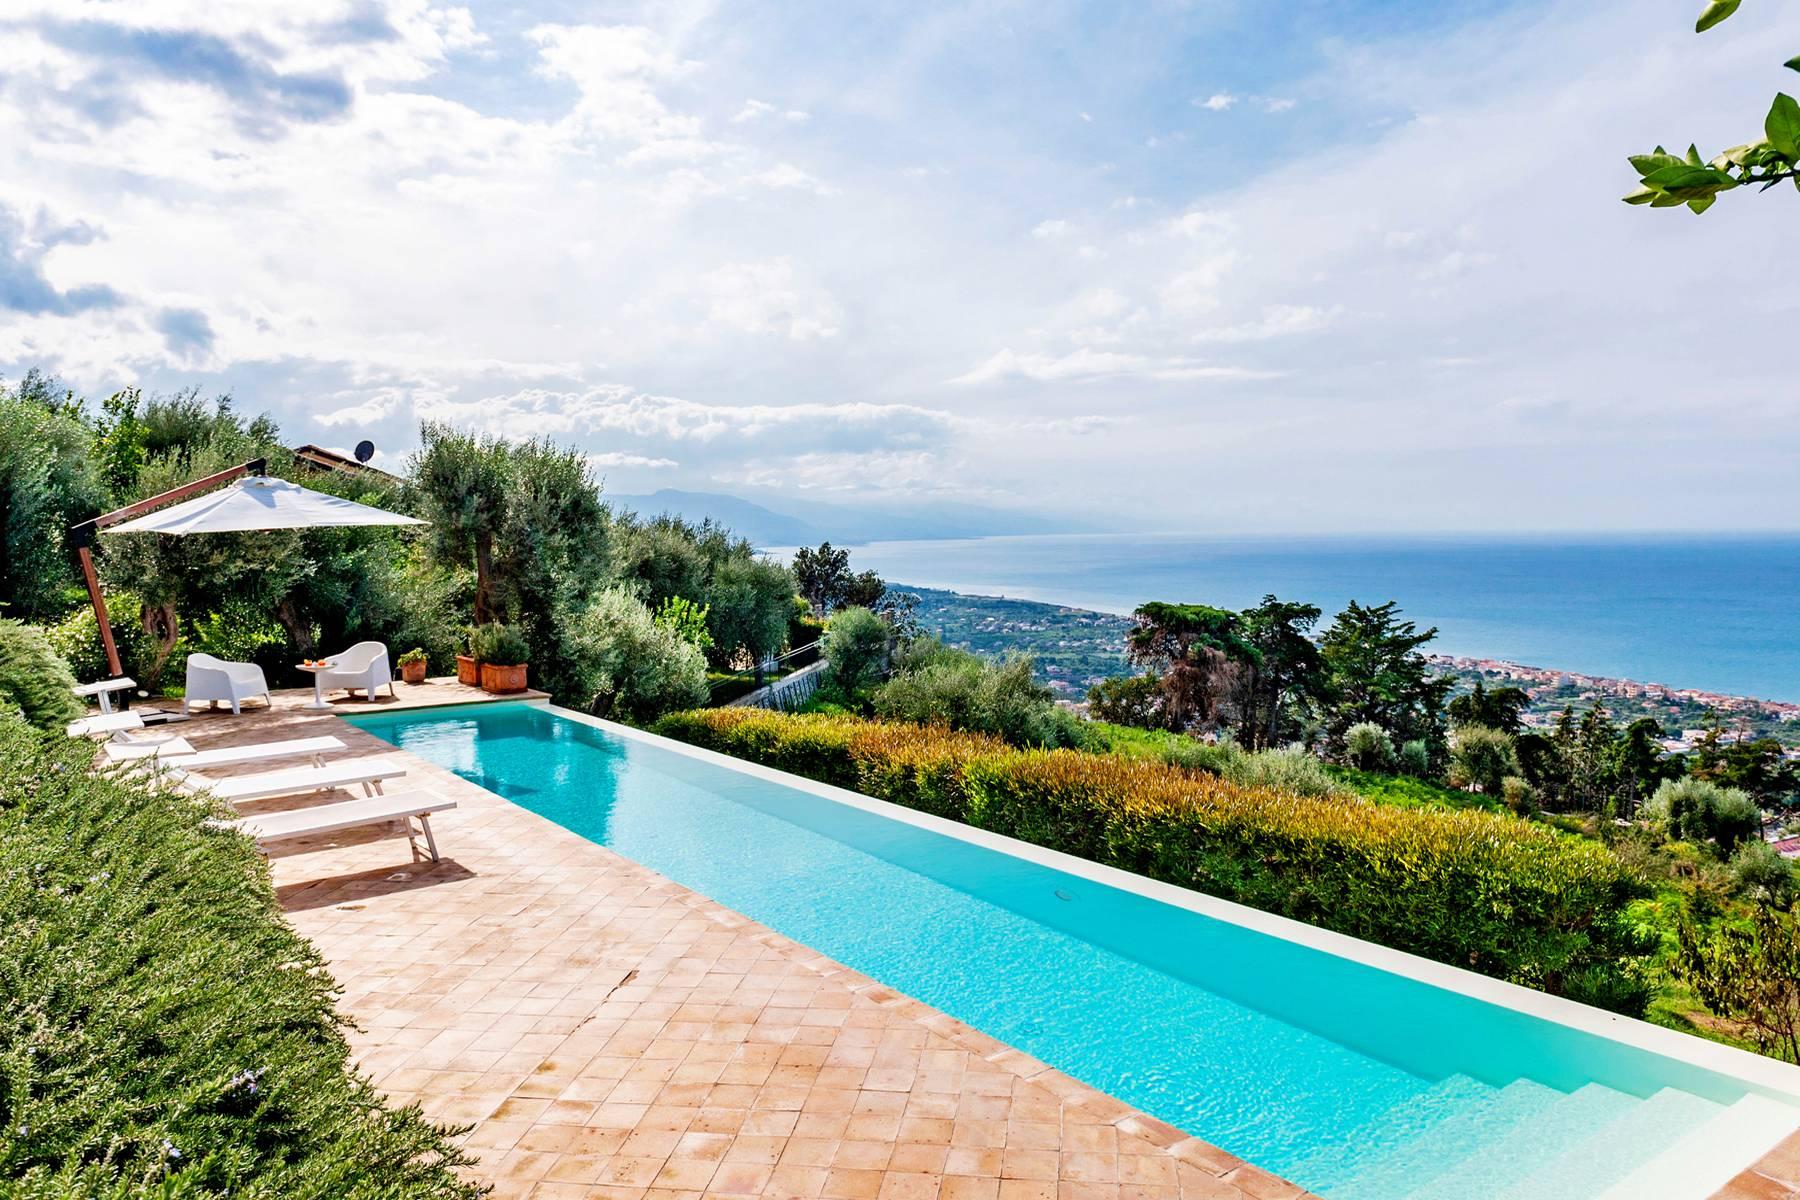 Charming villa with private pool overlooking the Eeolian Islands - 16